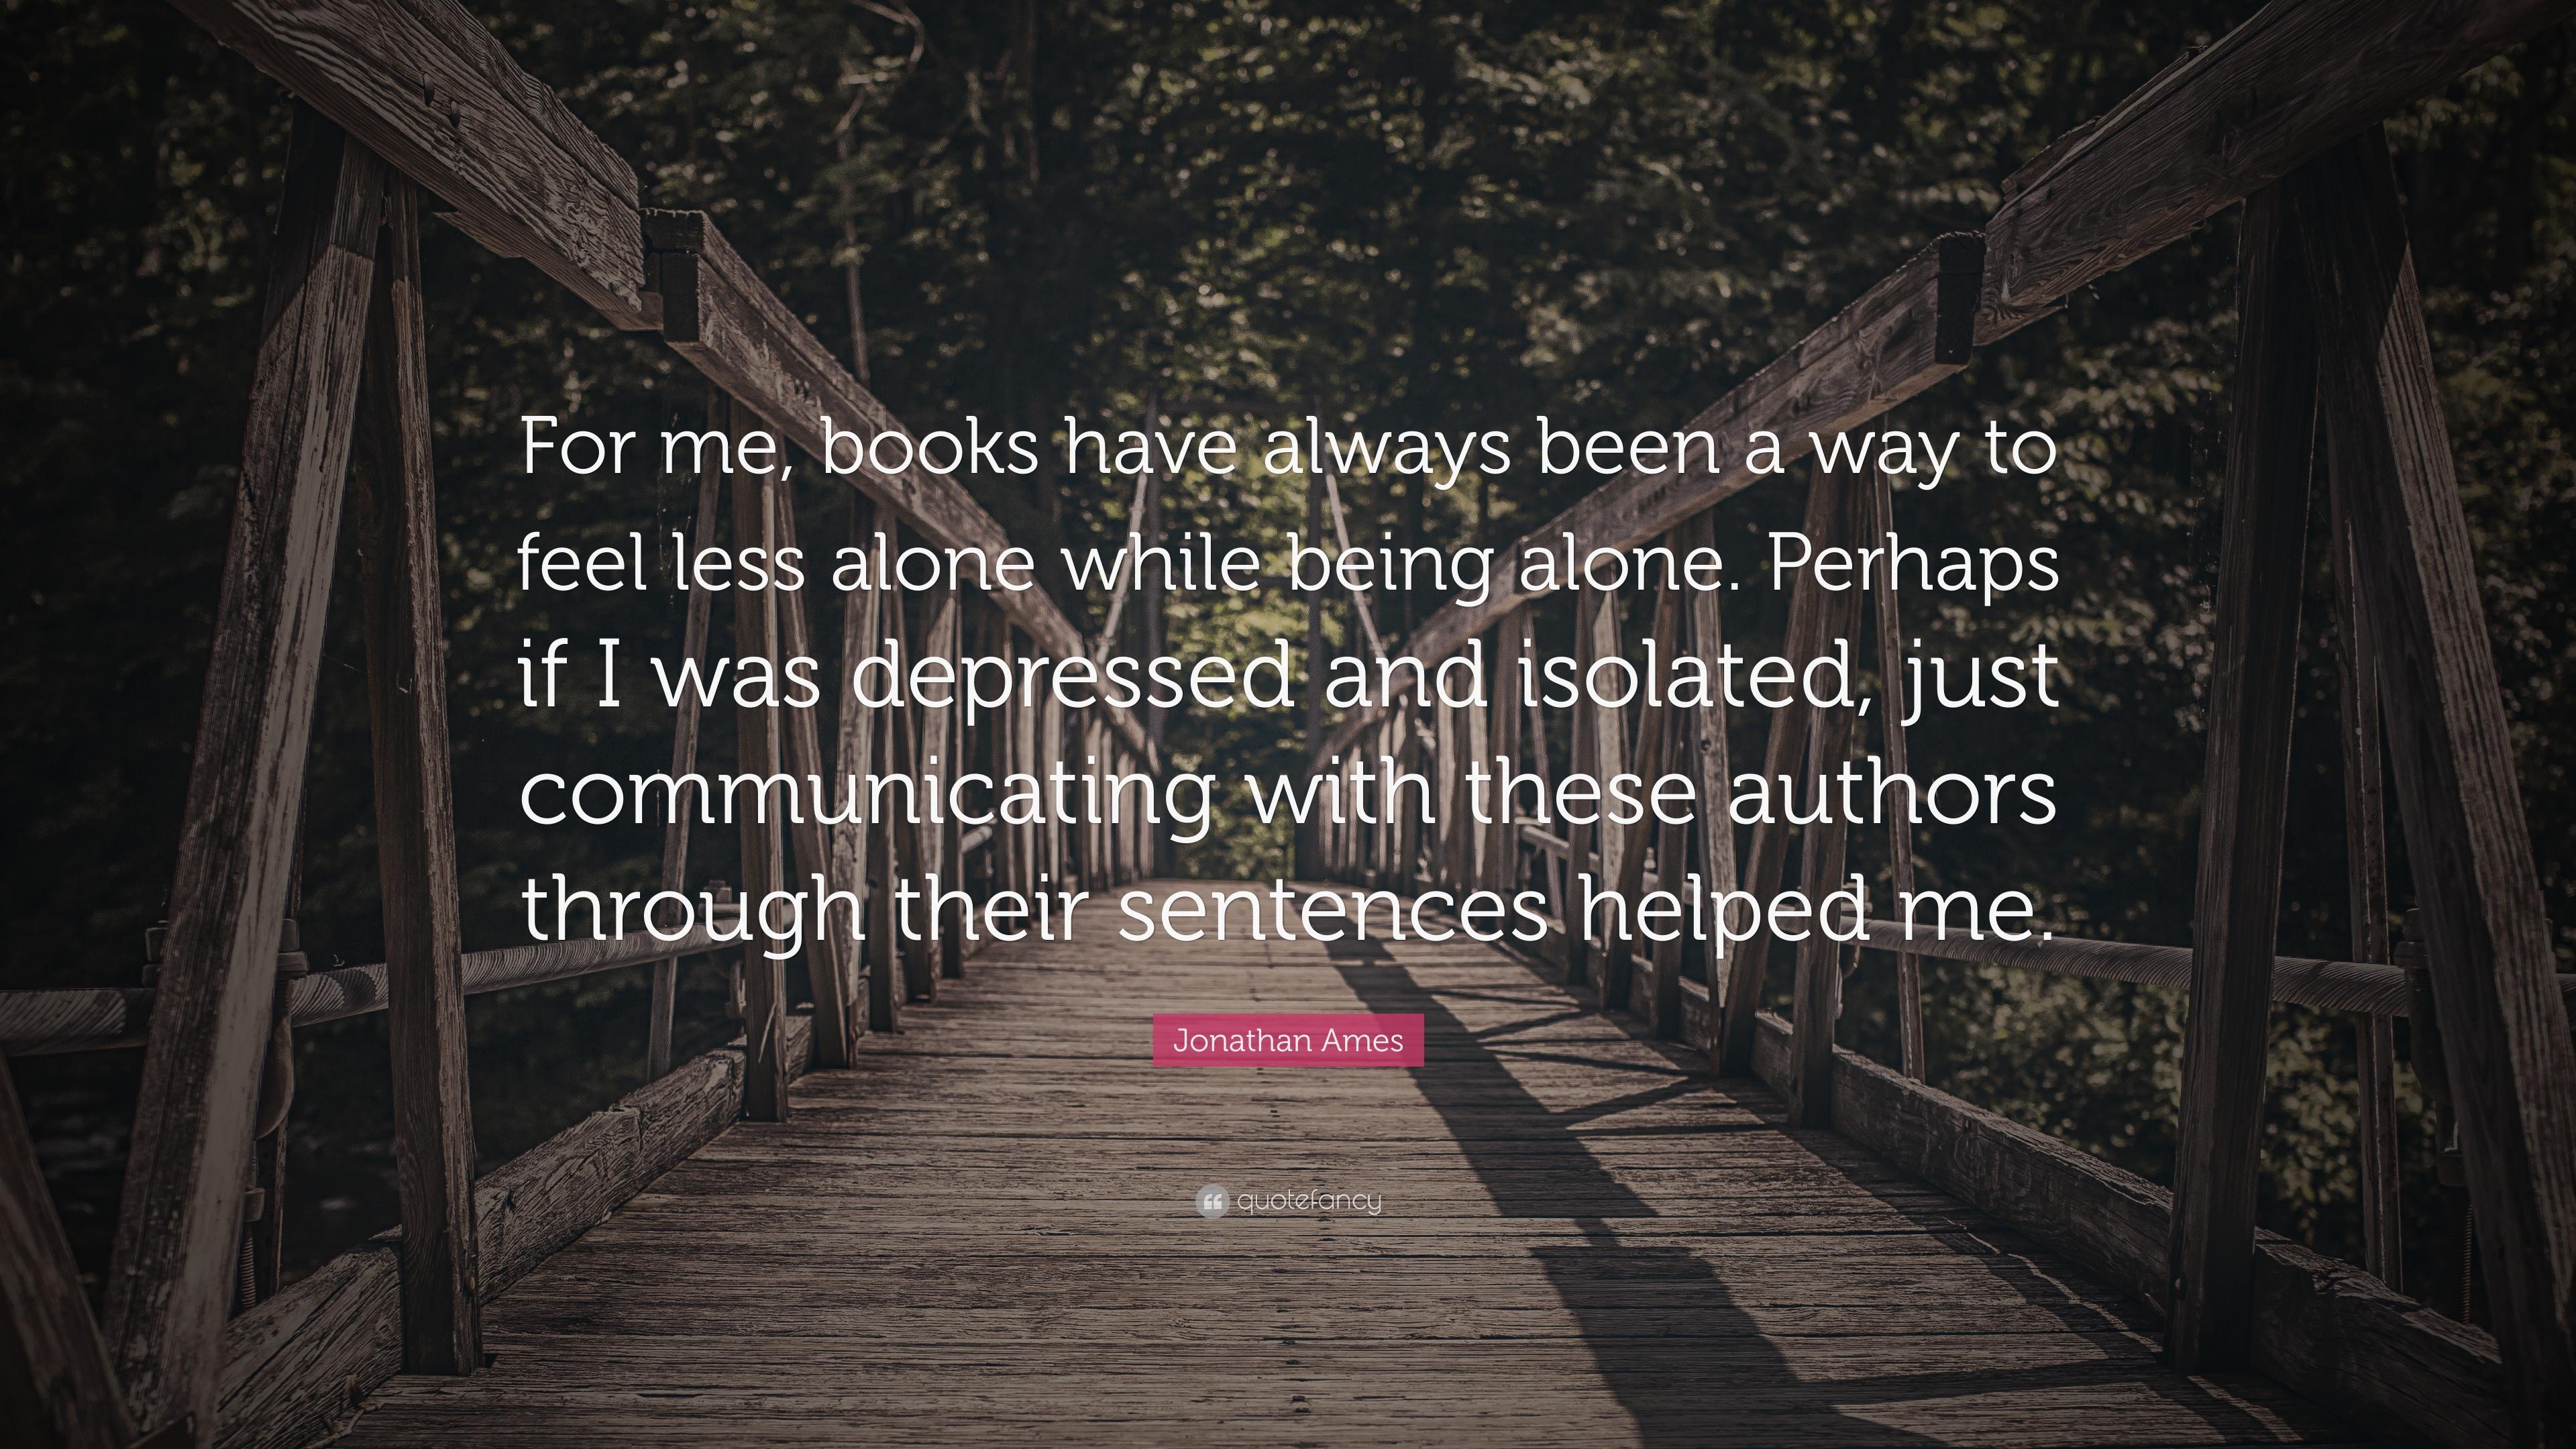 Jonathan Ames Quote: “For me, books have always been a way to feel